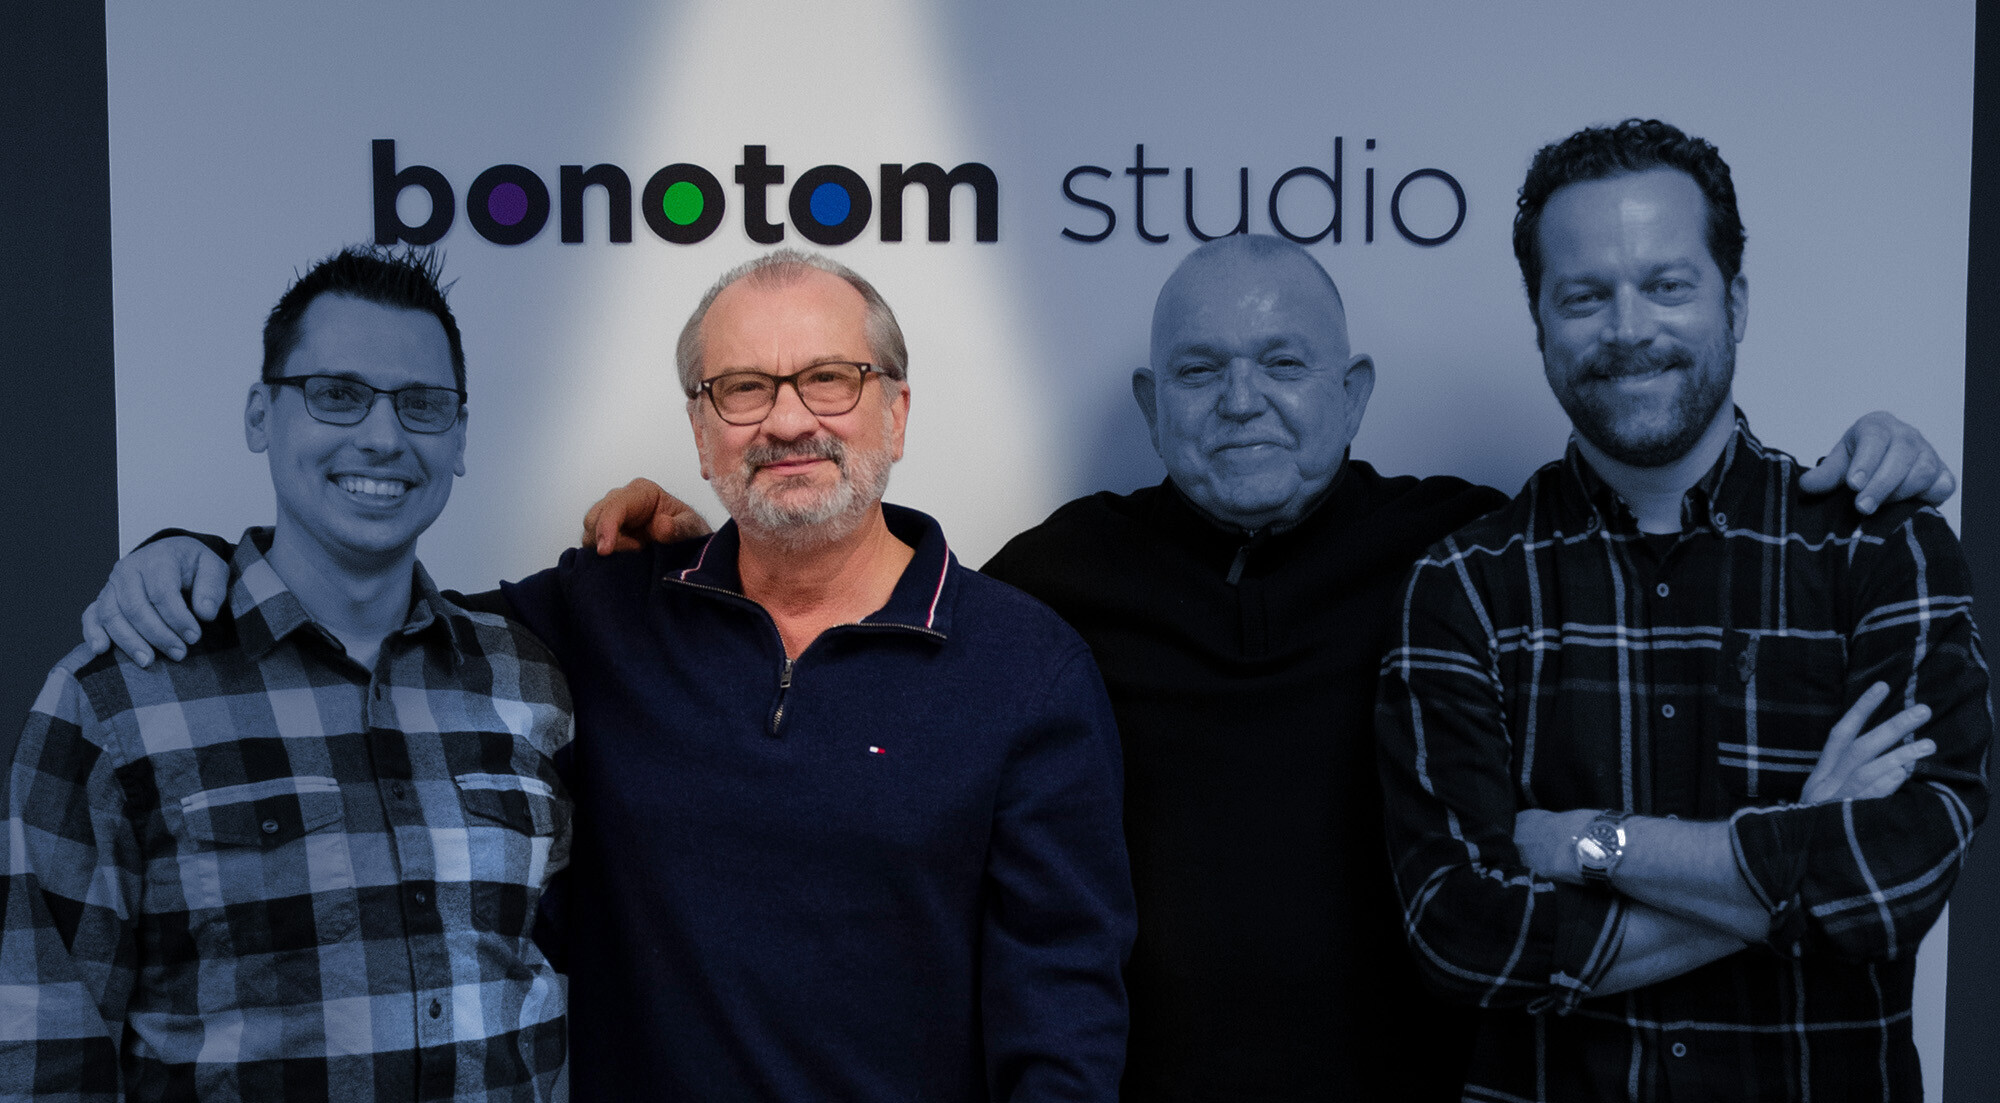 Group photo of bonotom employees in front of the BonoTom Studio logo with Tom spotlighted